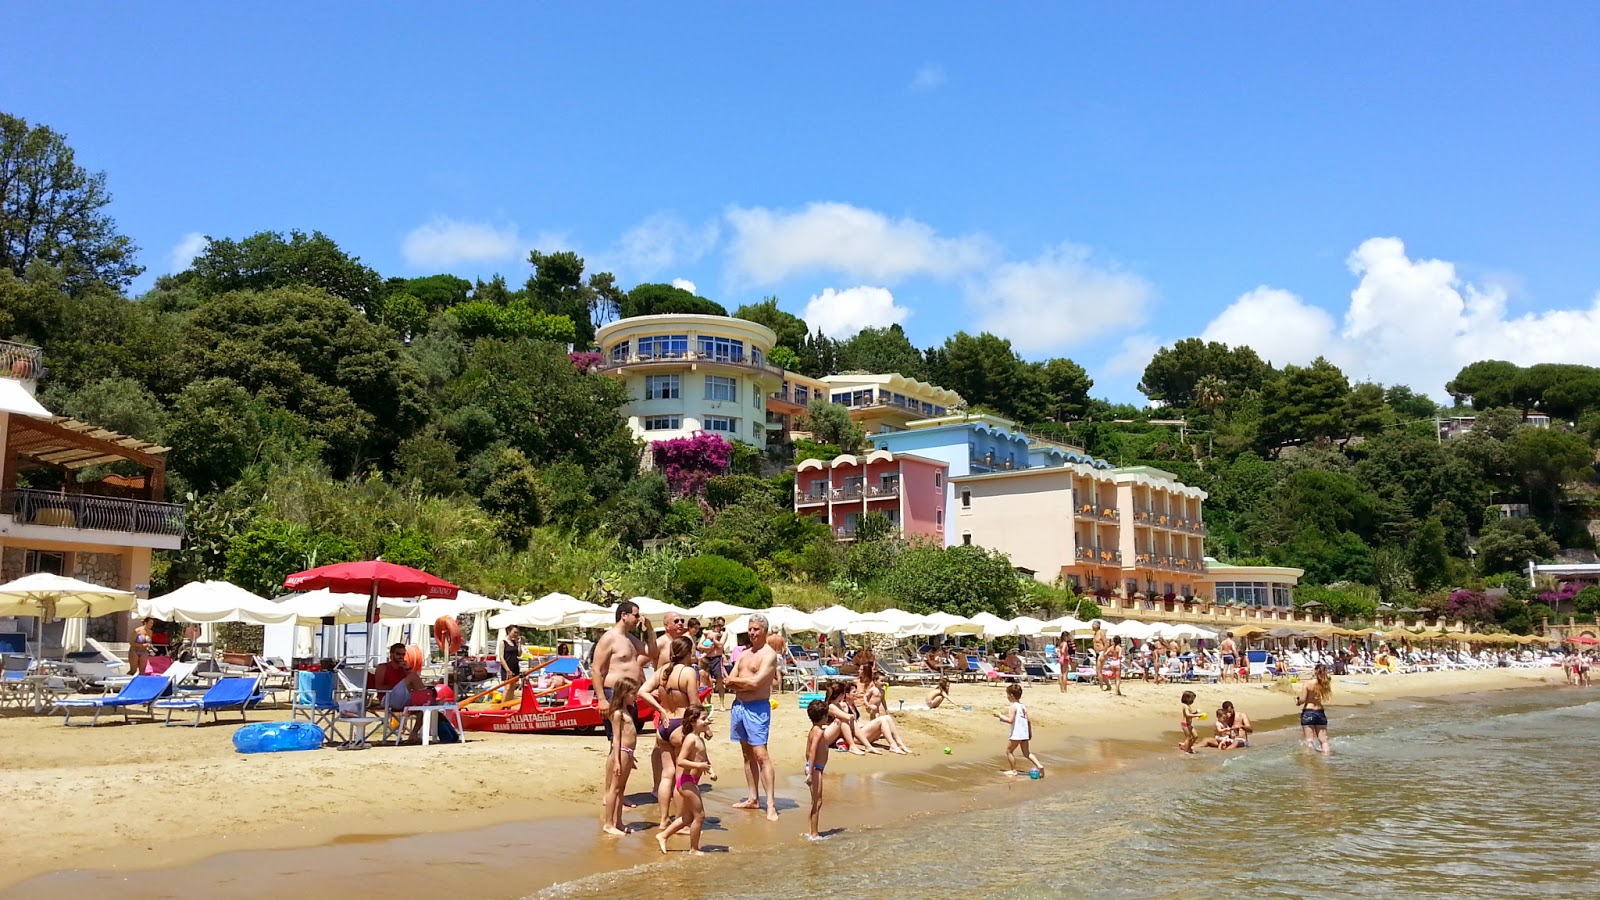 Photo of Summit Hotel beach - popular place among relax connoisseurs